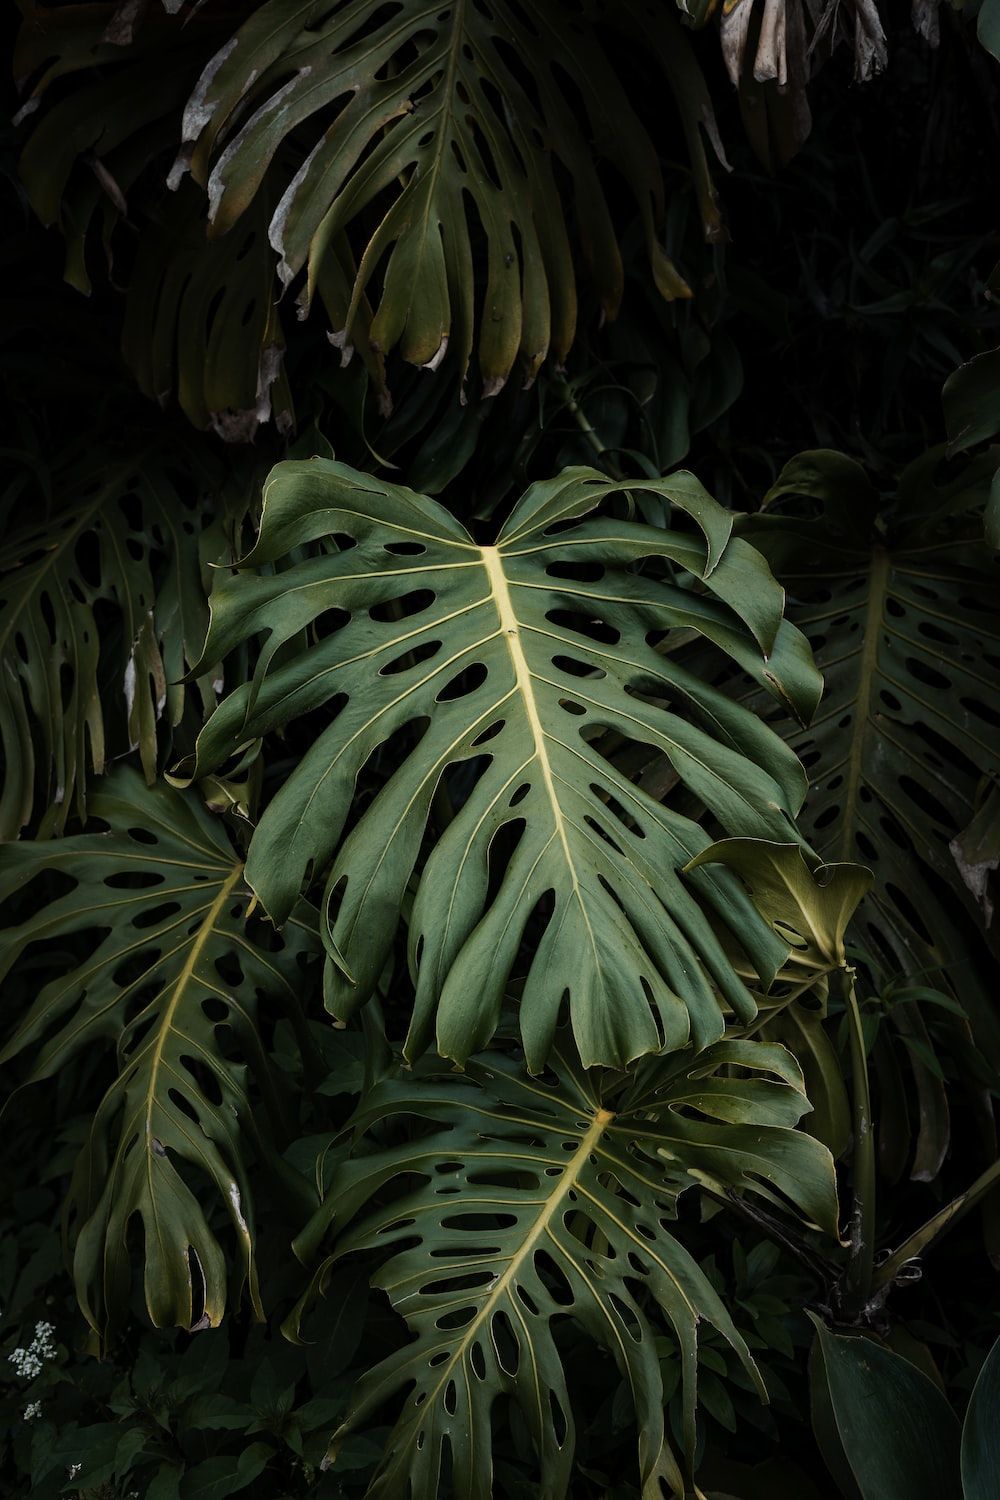 A large green leafy plant with a dark background - Monstera